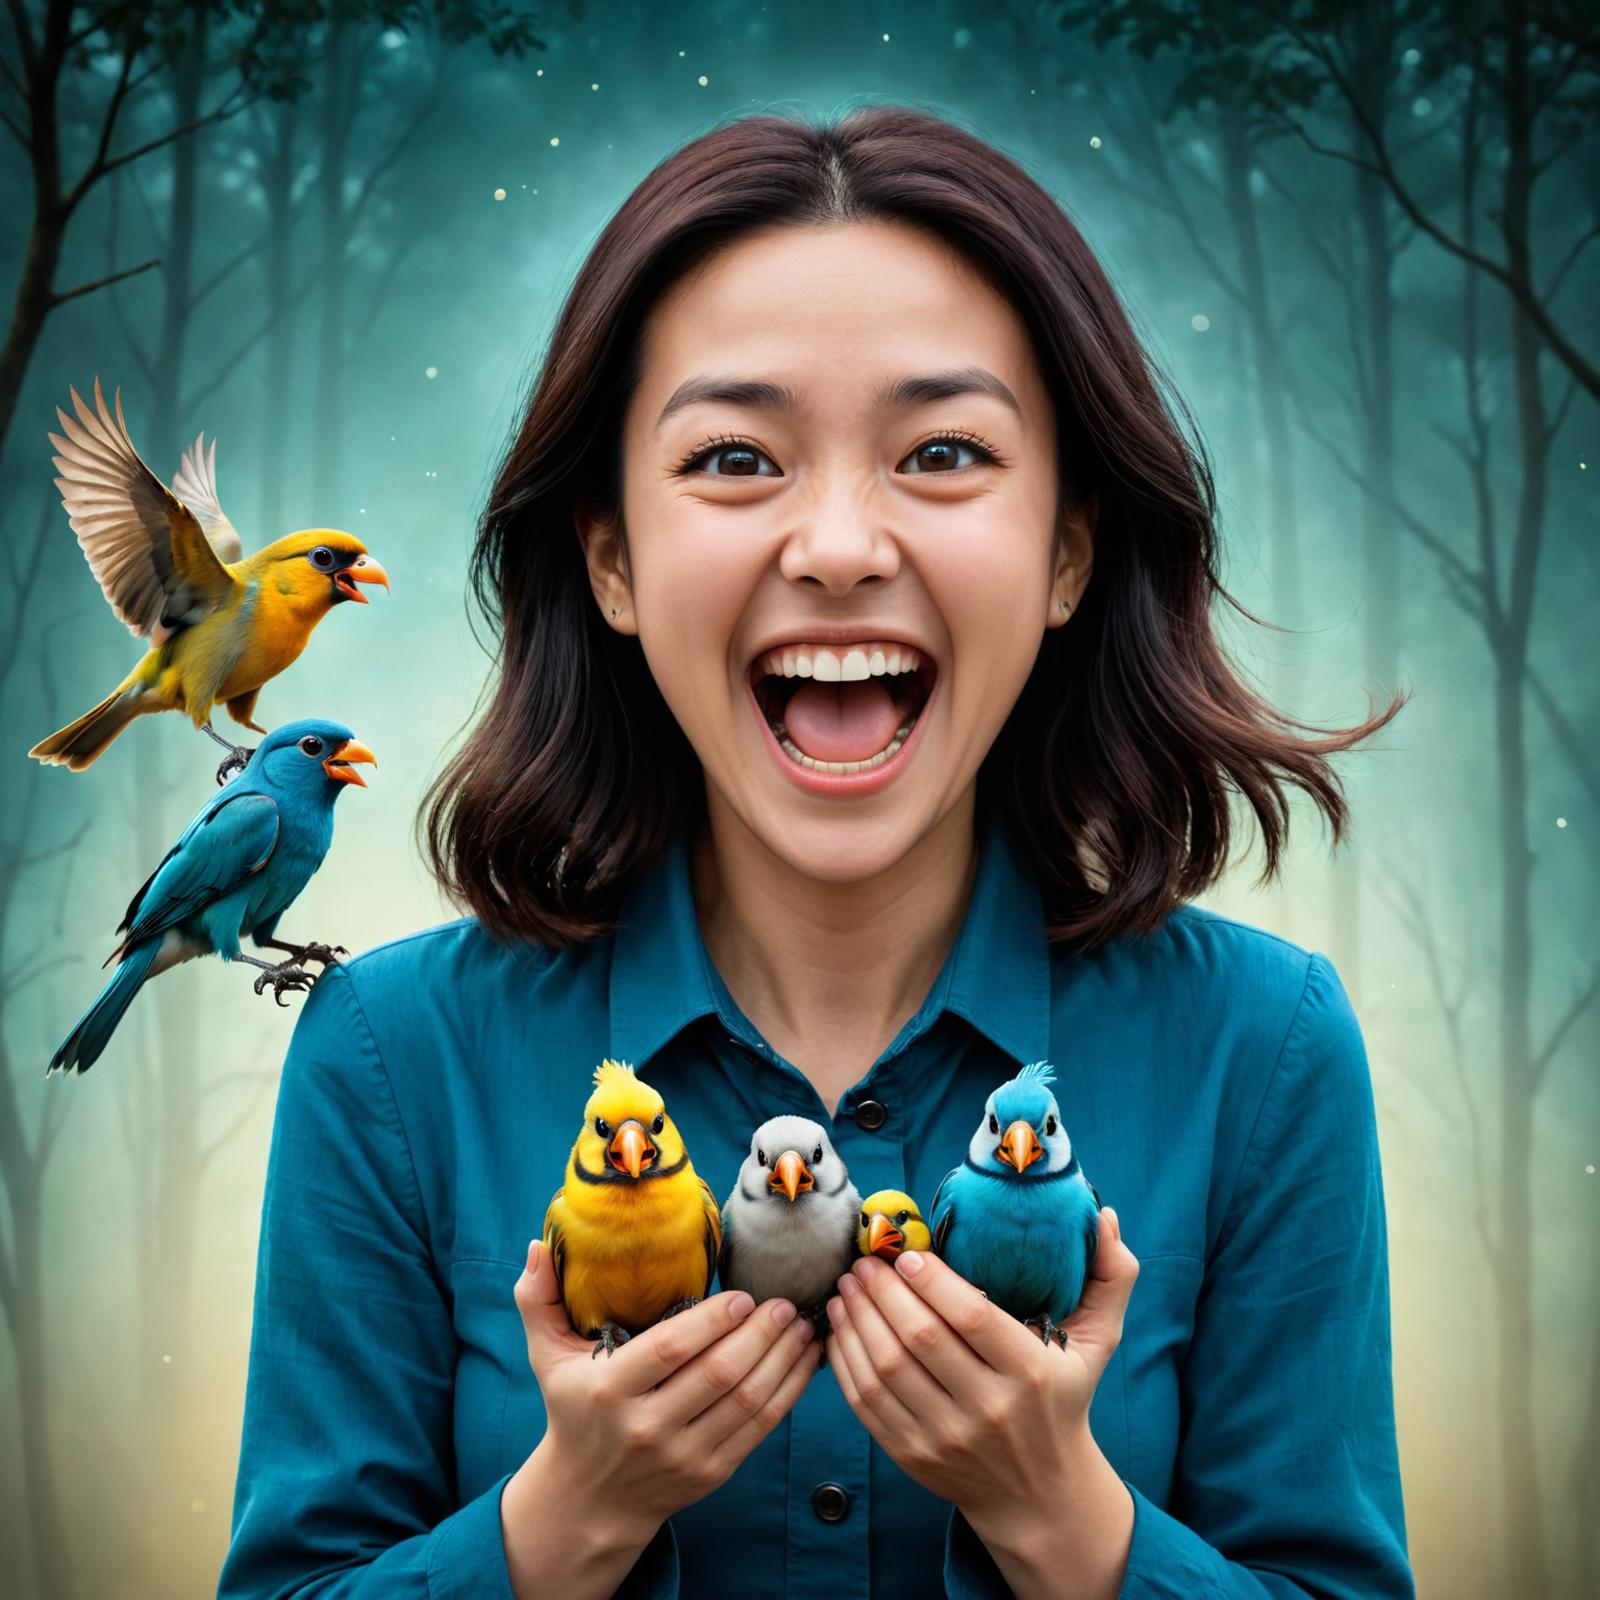 A woman holding two birds in her hands and laughing.